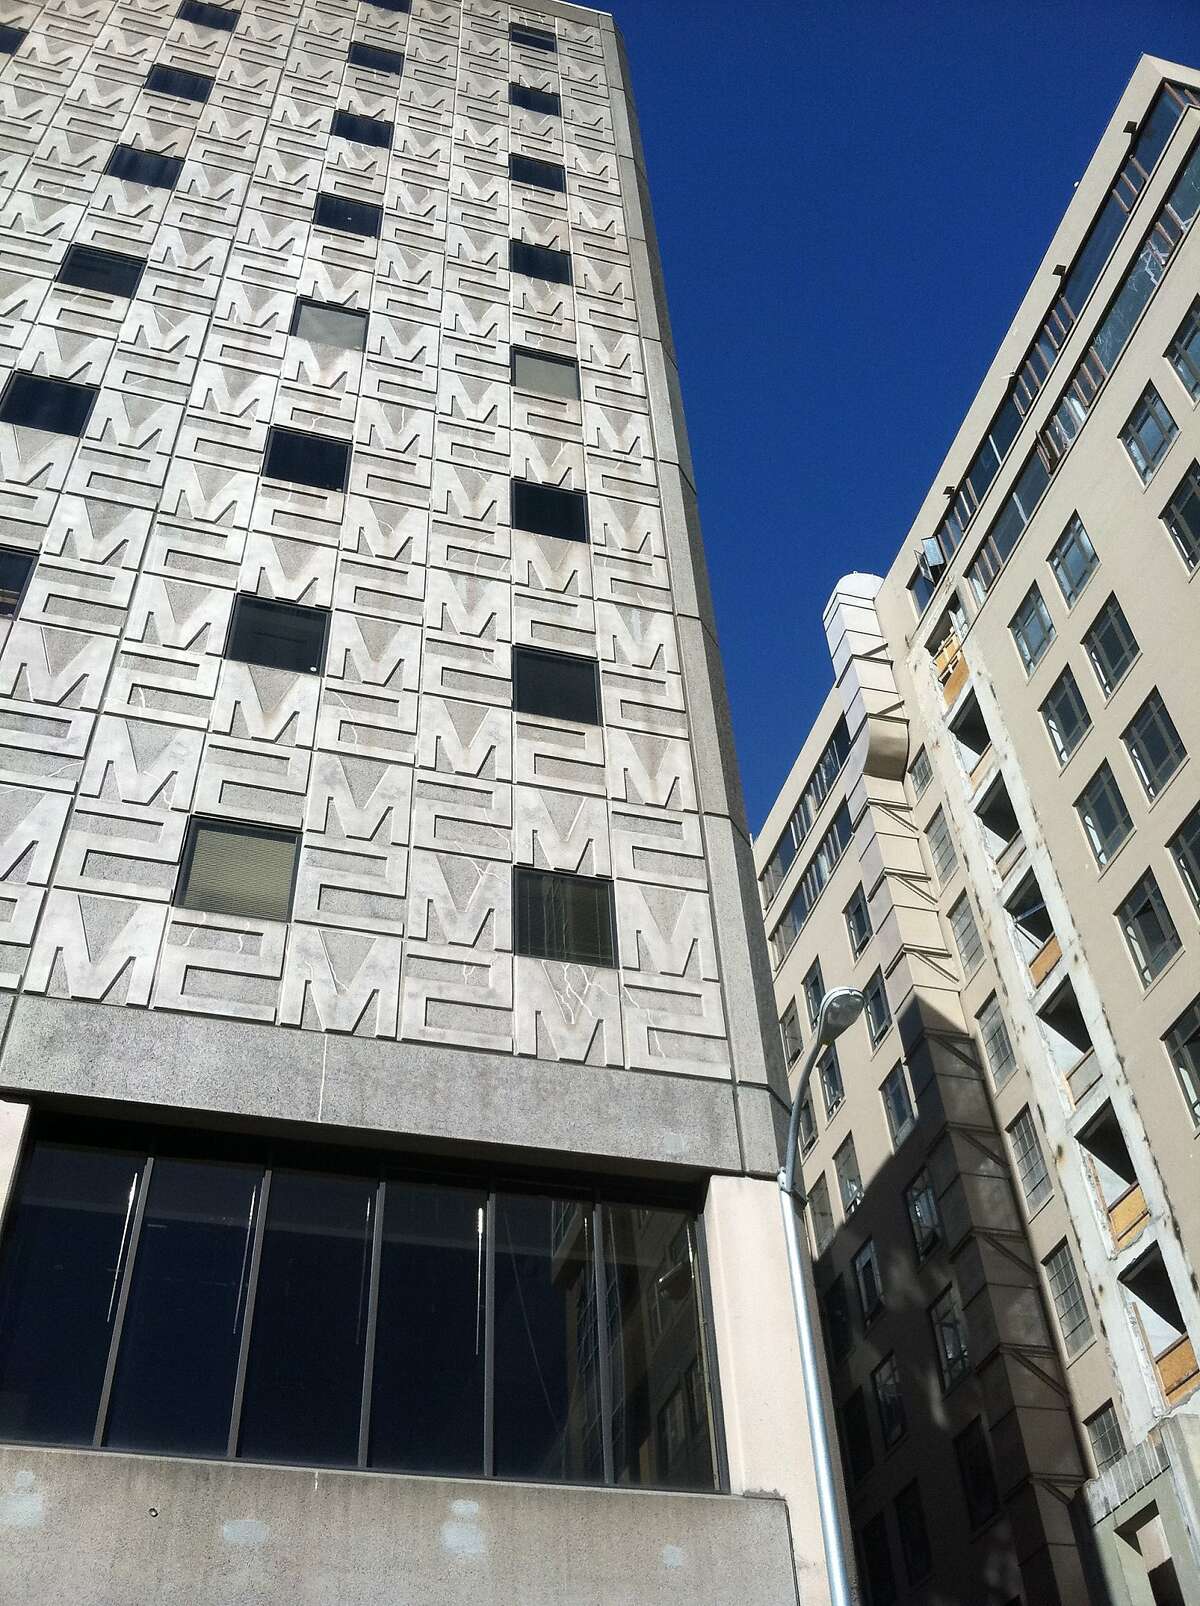 Now in the process of being named 1 10th Street, with a new glass skin, the 1970s addition to the Merchandise Mart was of note mainly for its small windows and logo'd M2 panels.